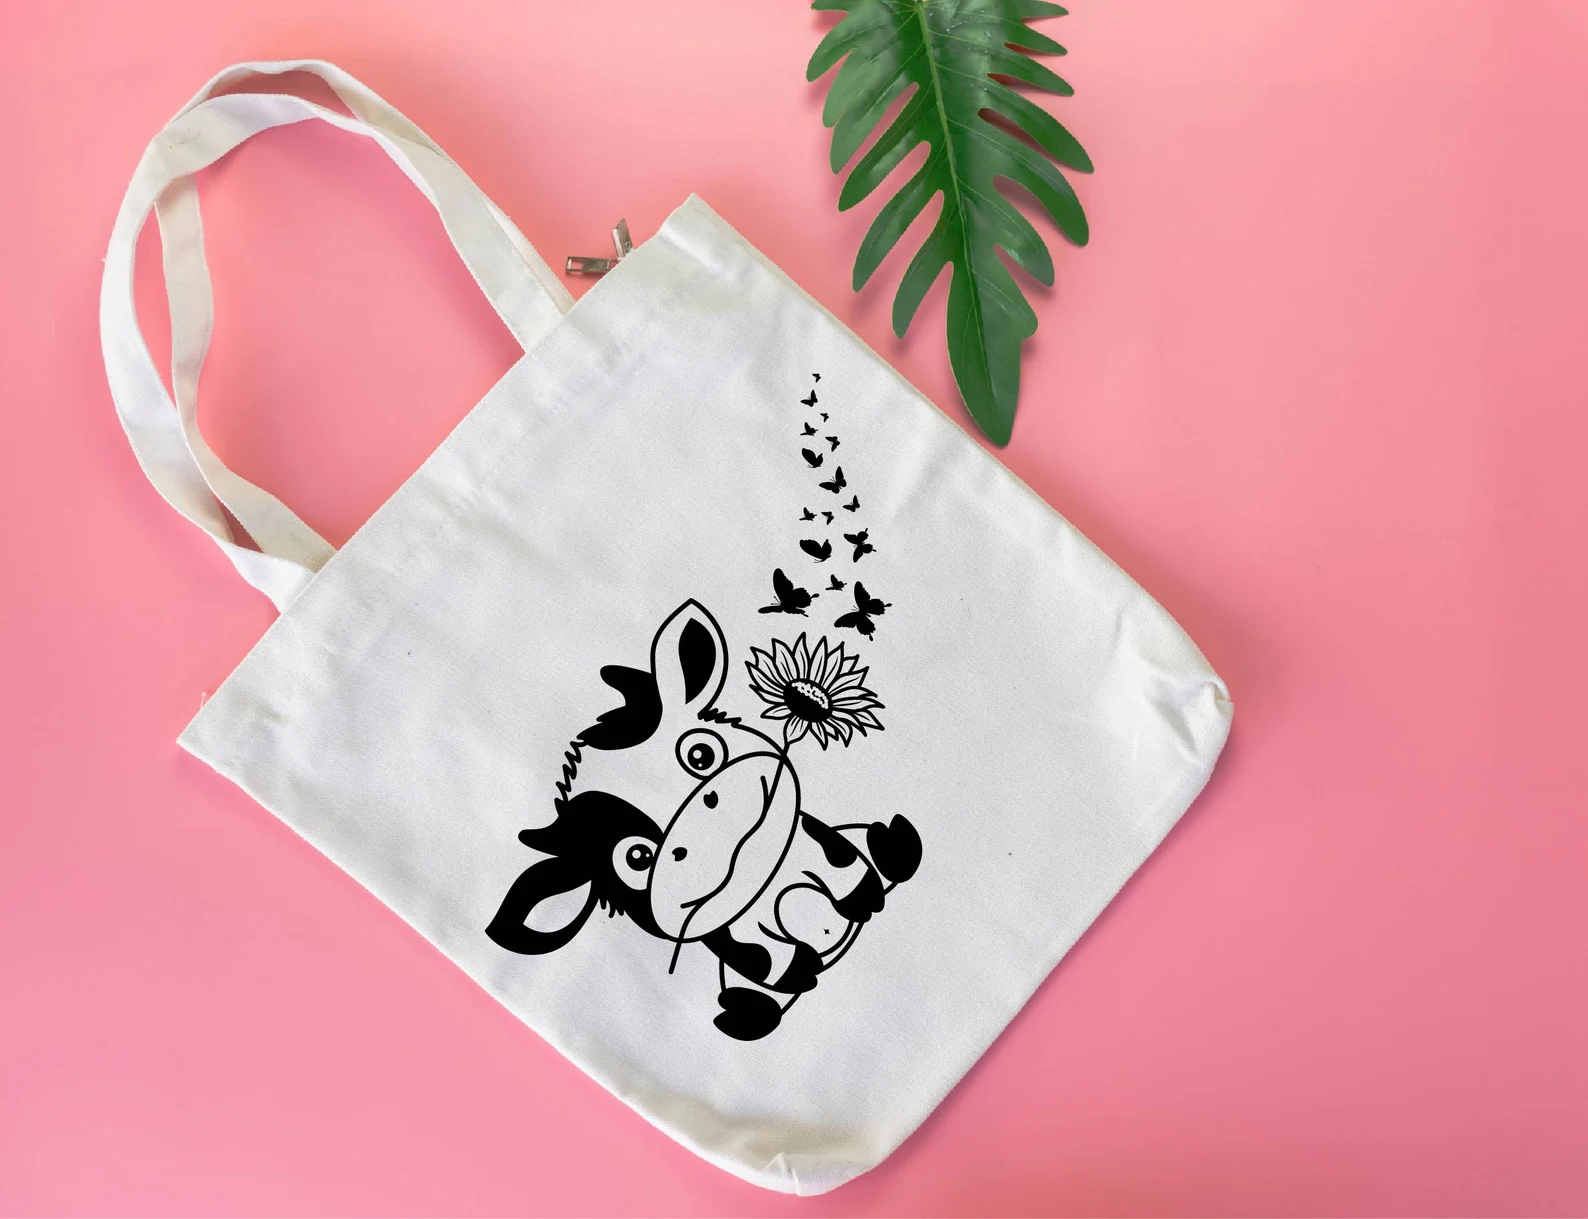 Tote bag with a picture of a cow on it.